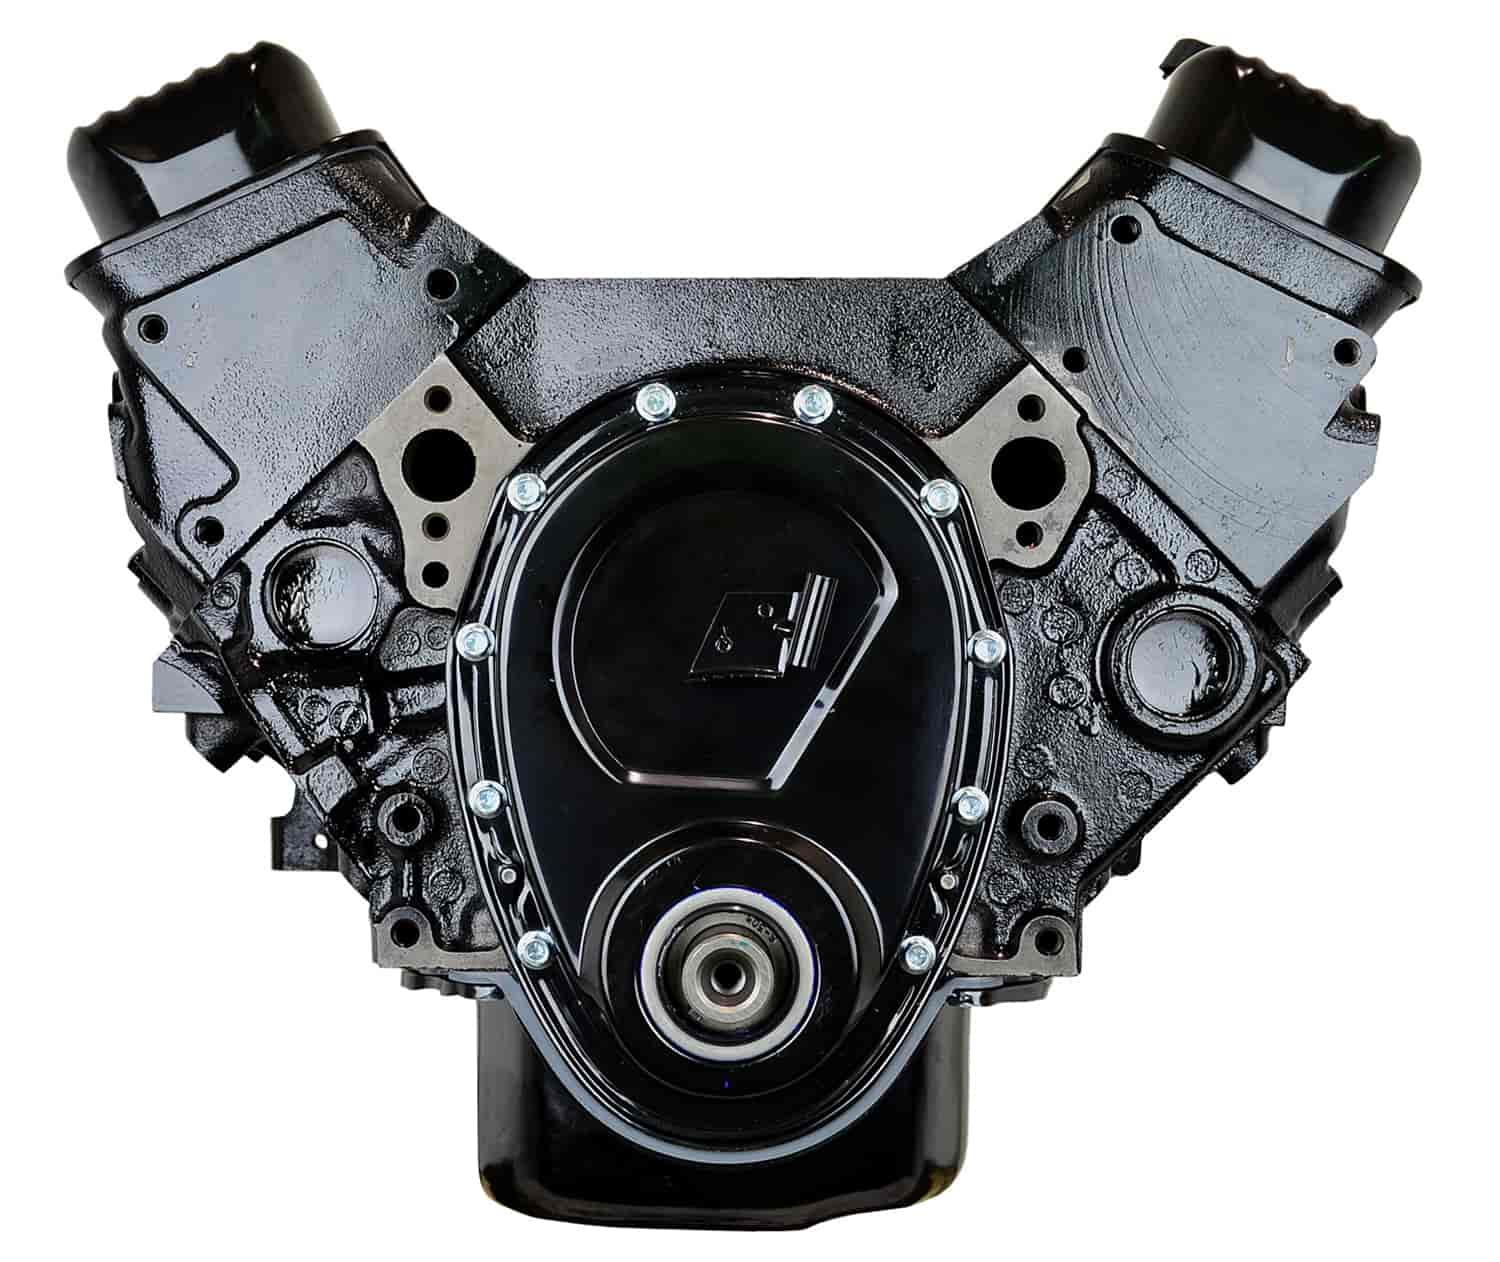 Remanufactured Crate Engine for Marine Applications with 1987-1992 Chevy 4.3L V6